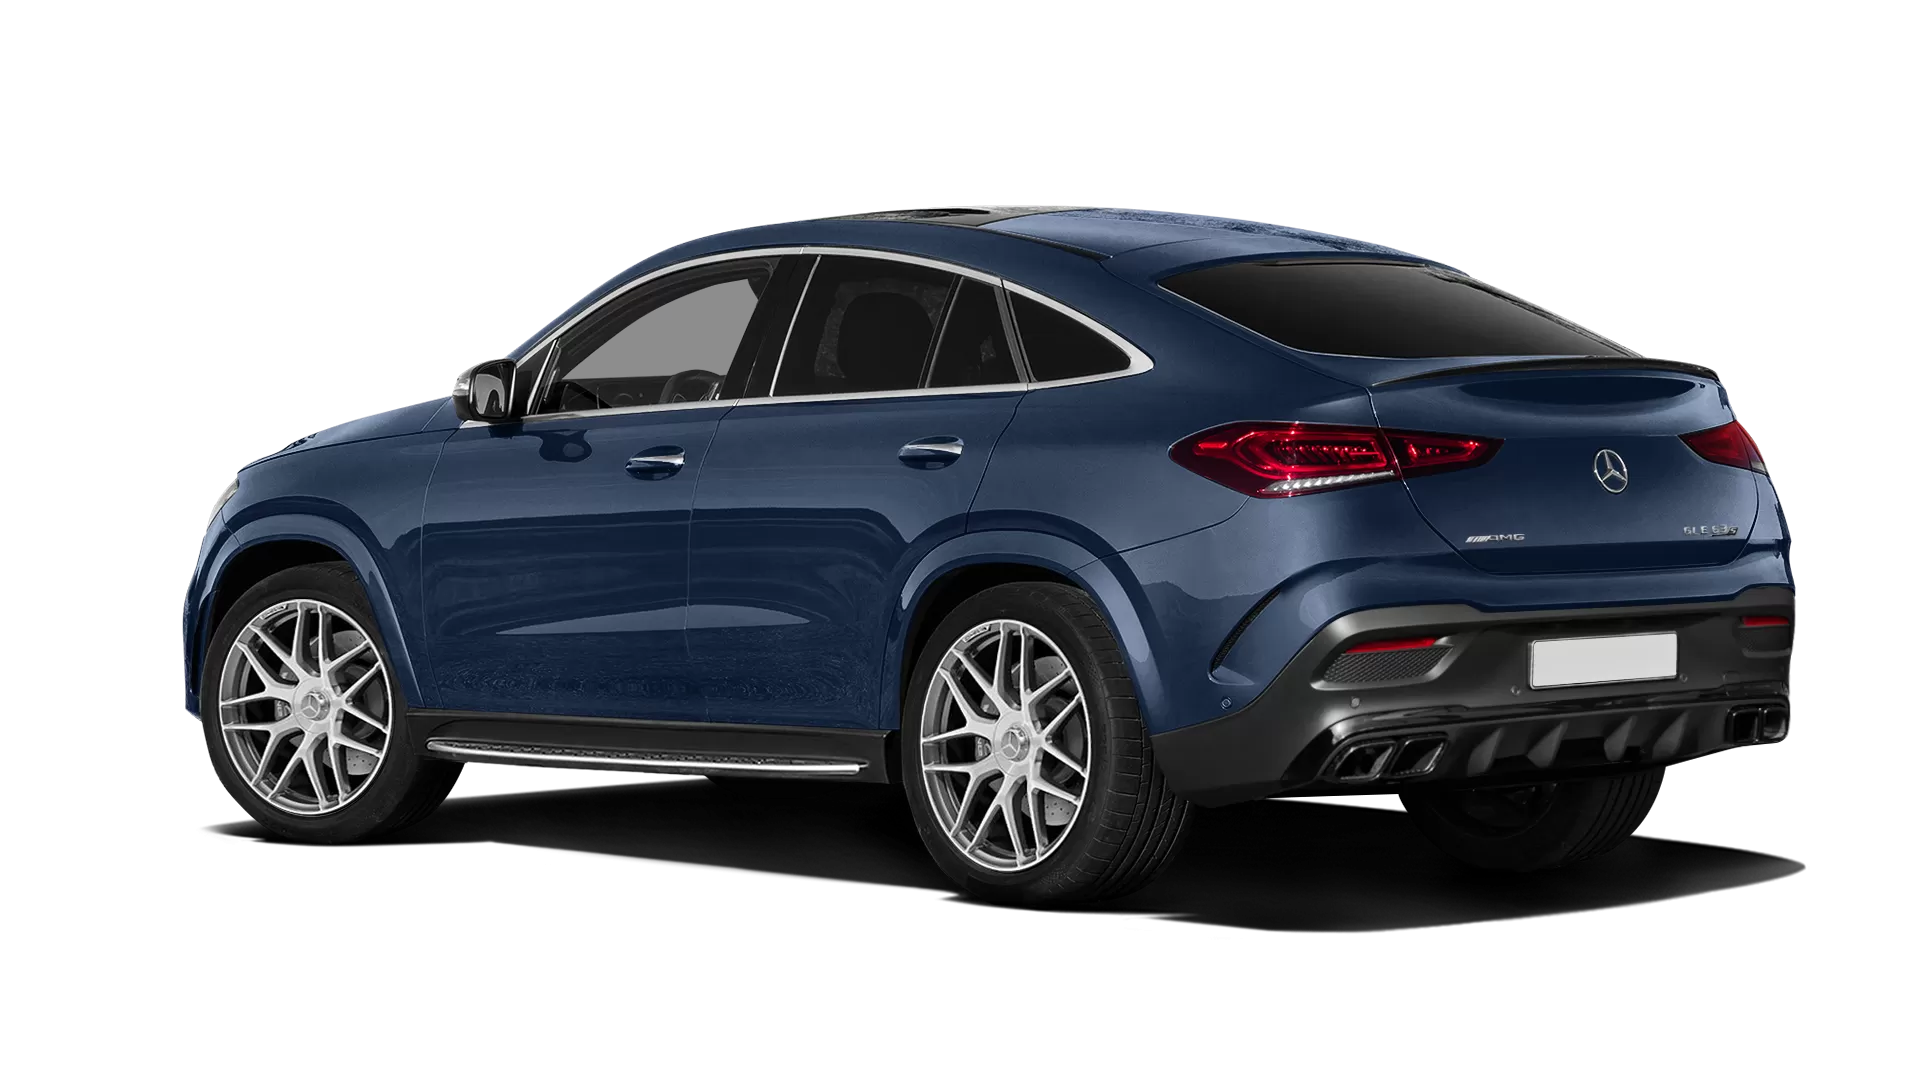 Mercedes GLE Coupe AMG 63 C167 stock rear view in Cavansite Blue color